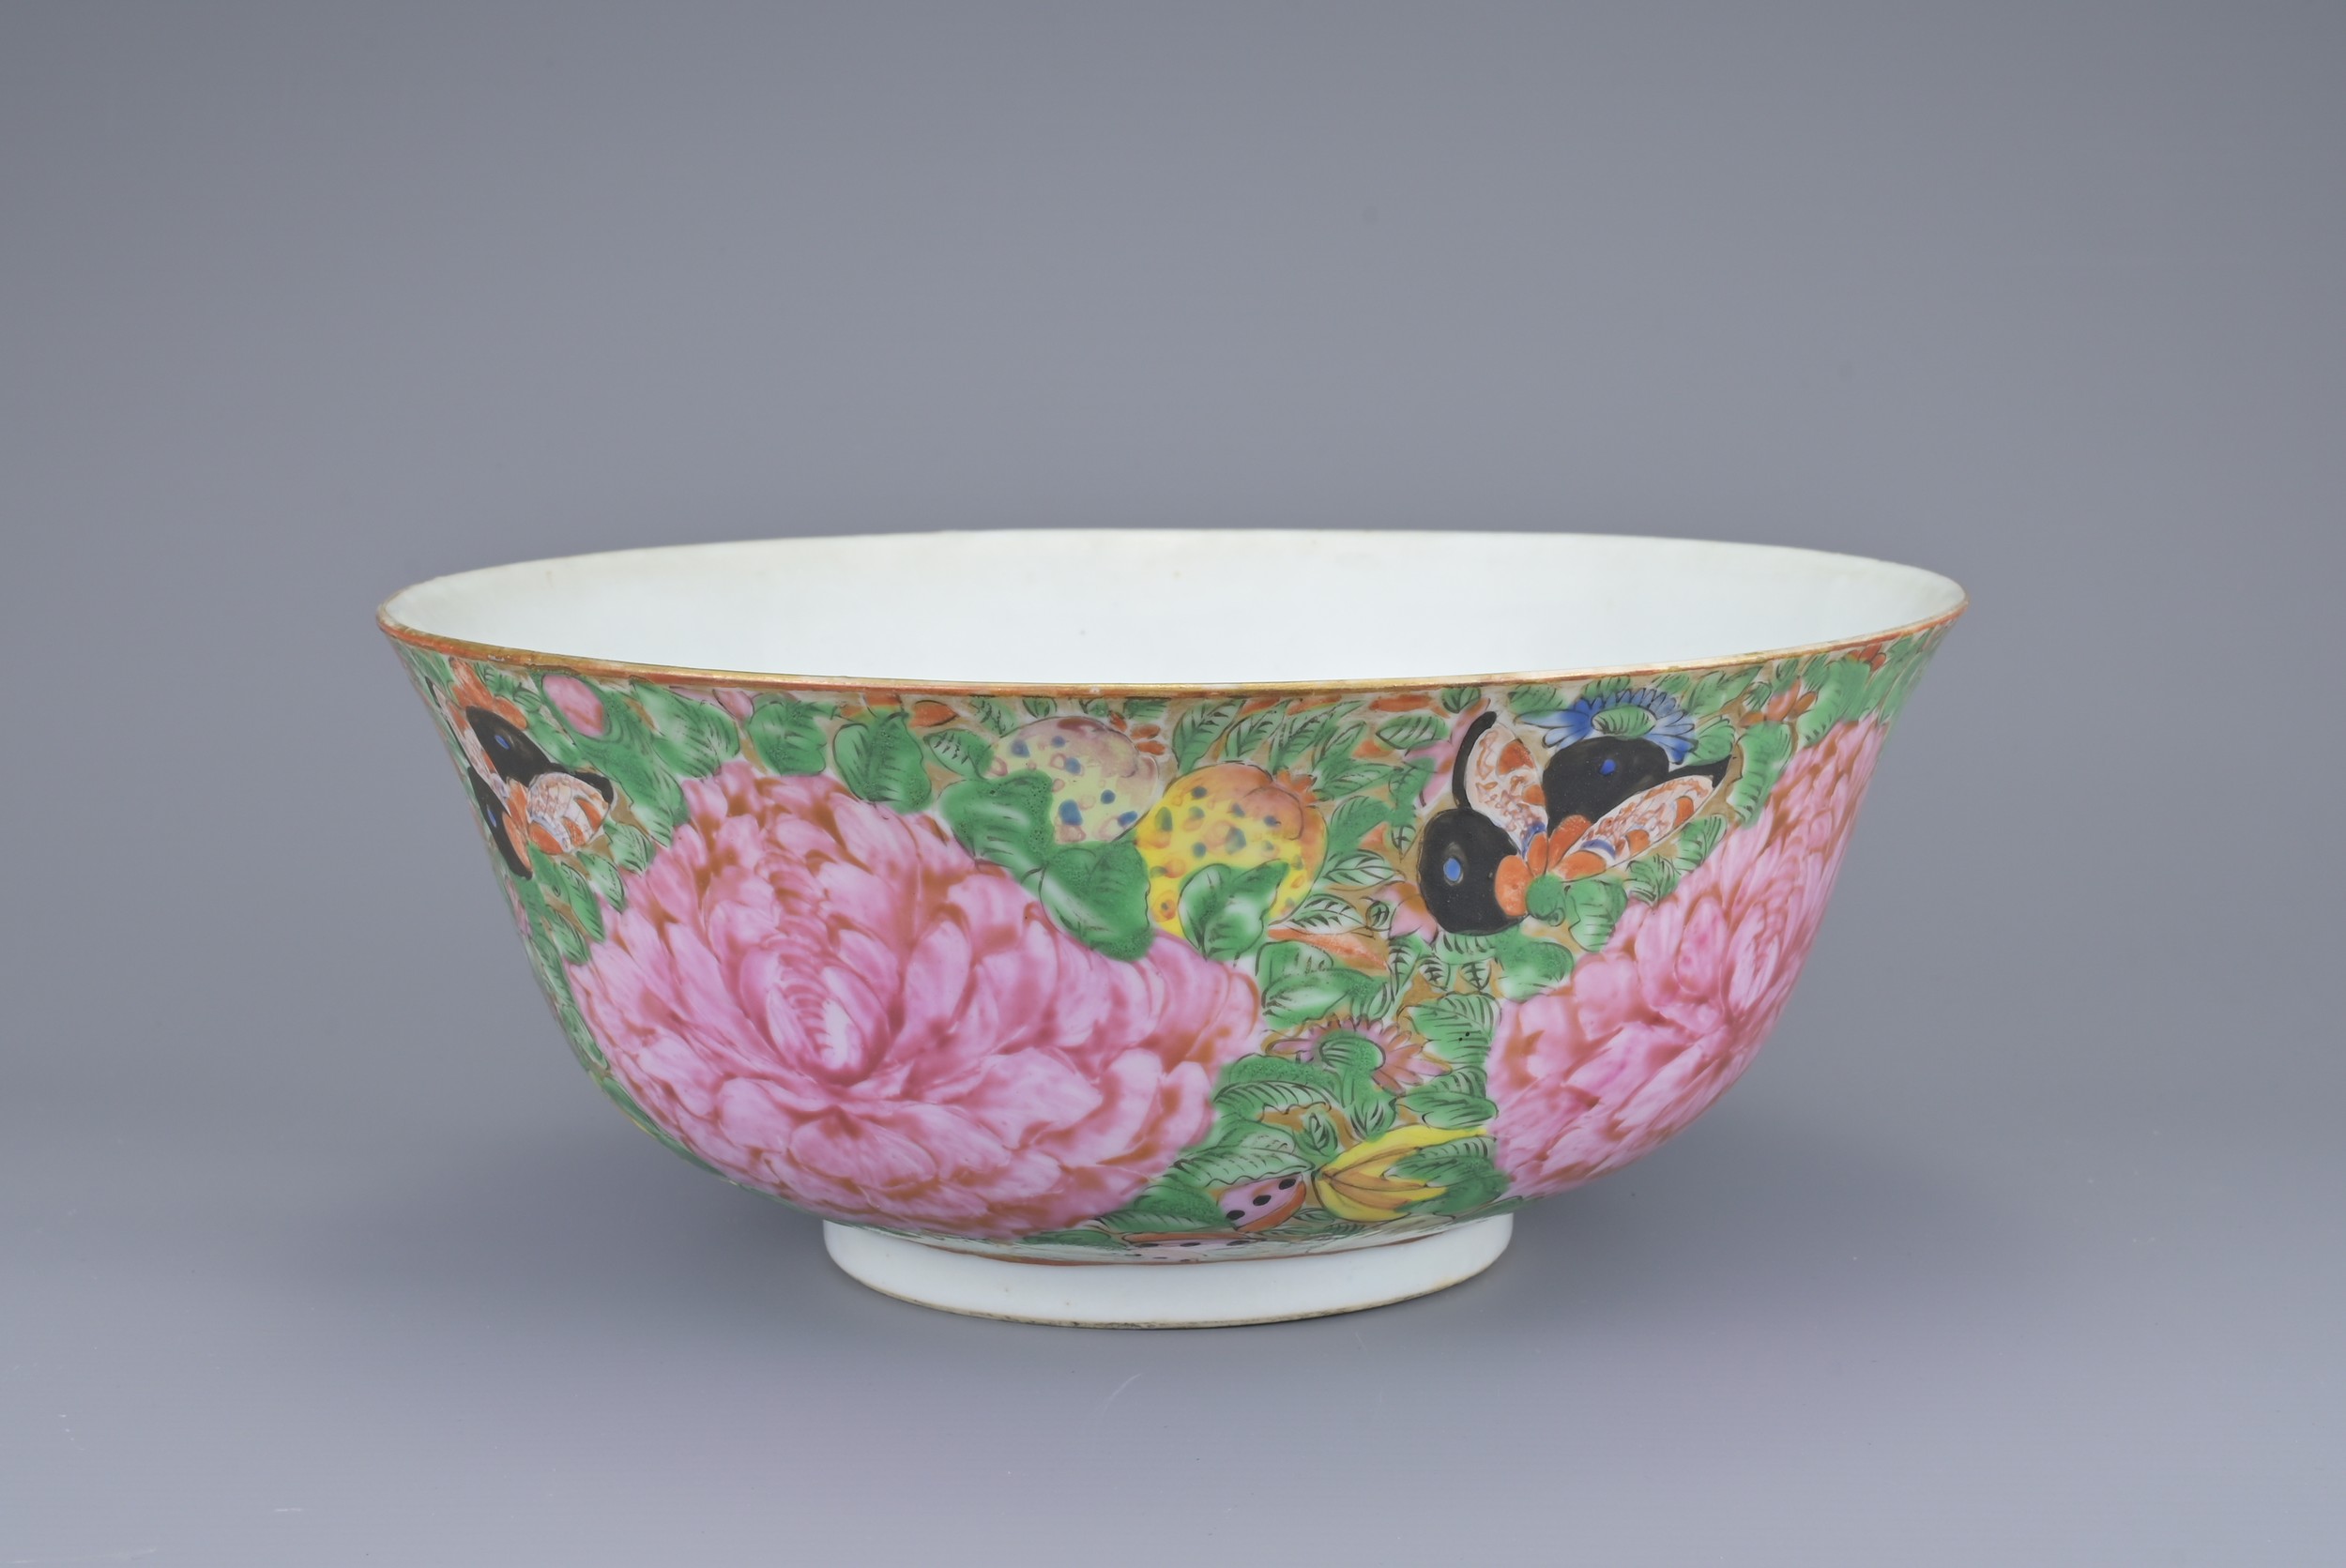 A CHINESE FAMILLE ROSE PORCELAIN BOWL, 19TH CENTURY. Decorated with four large peony blossoms.